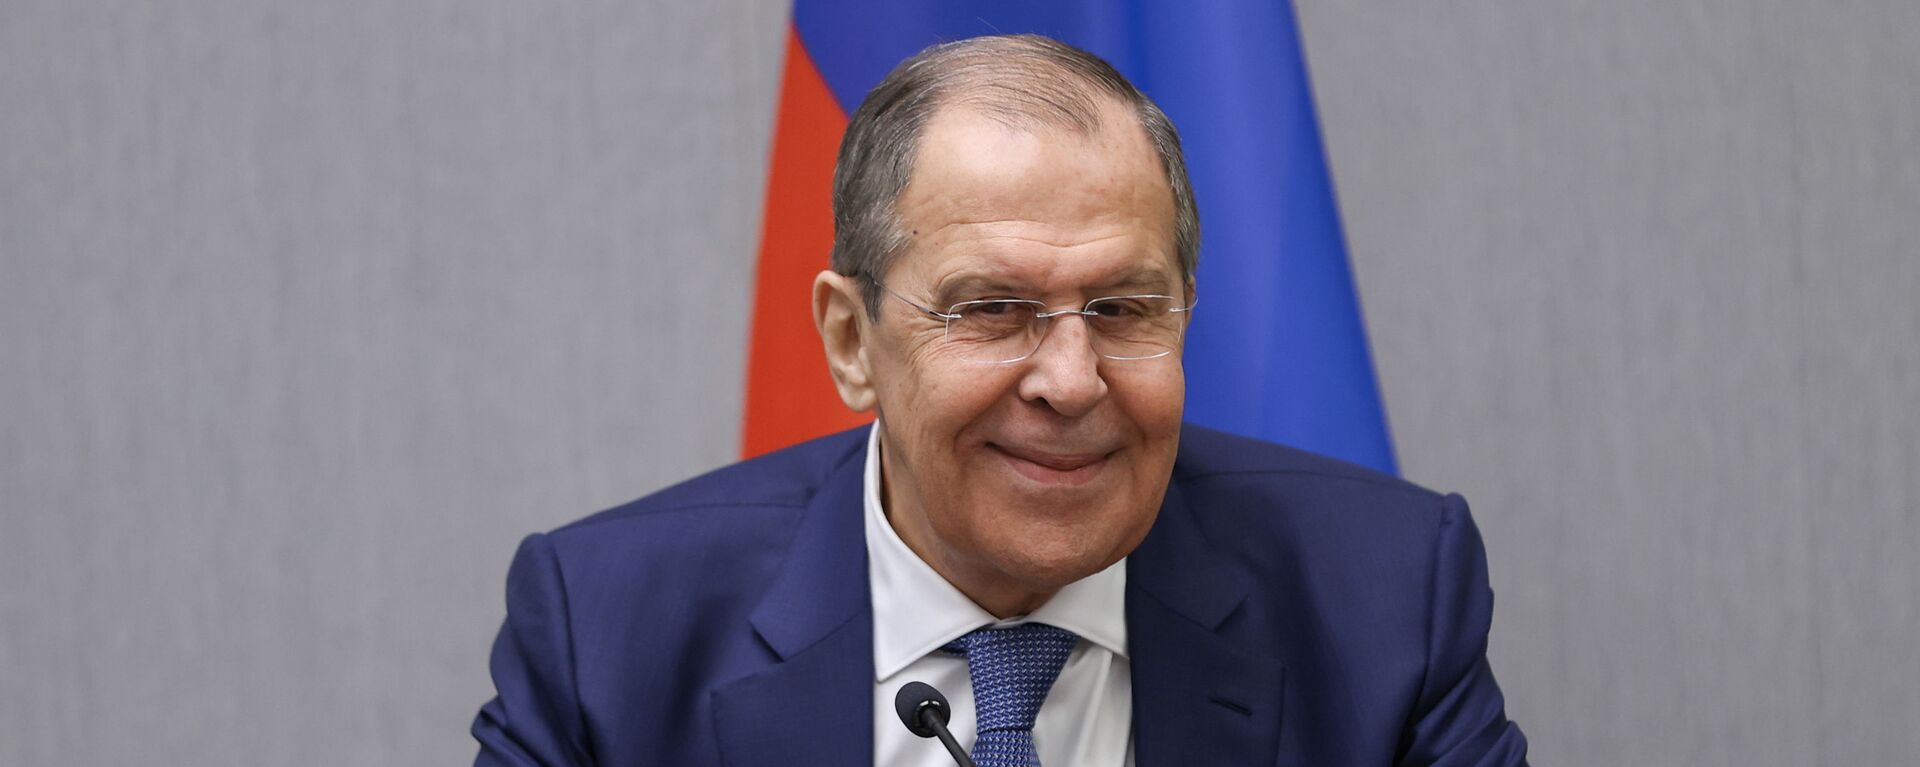 Russia's Foreign Minister Sergei Lavrov reacts during a news conference following talks with Malta's Foreign Minister Evarist Bartolo in Sochi, Russia May 25, 2021. - Sputnik International, 1920, 28.01.2022